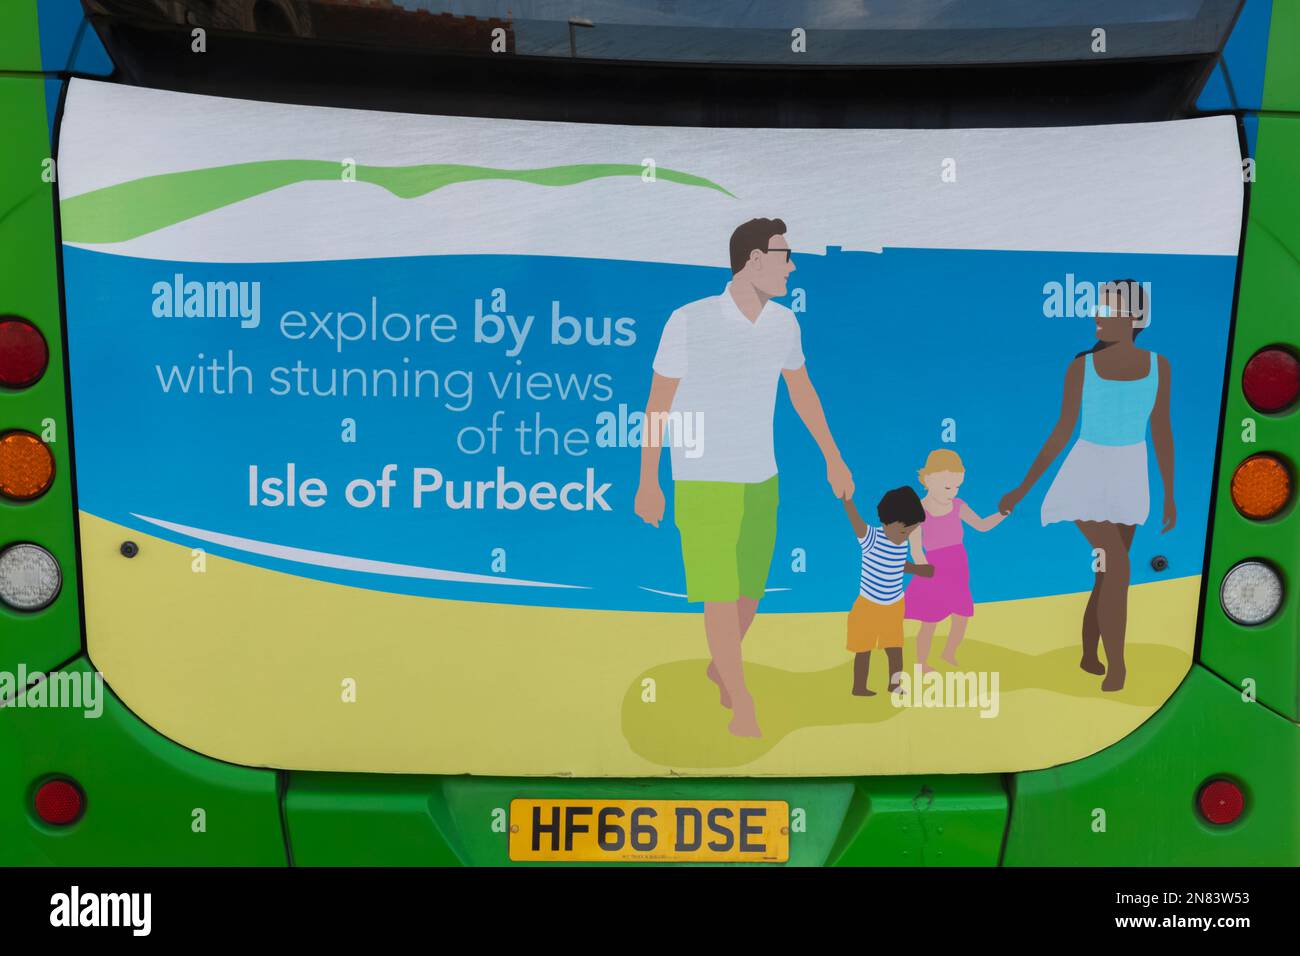 England, Dorset, Isle of Purbeck, Swanage, Public Bus Advertising Artwork featuring Mixed Raced Couple with Children Stock Photo